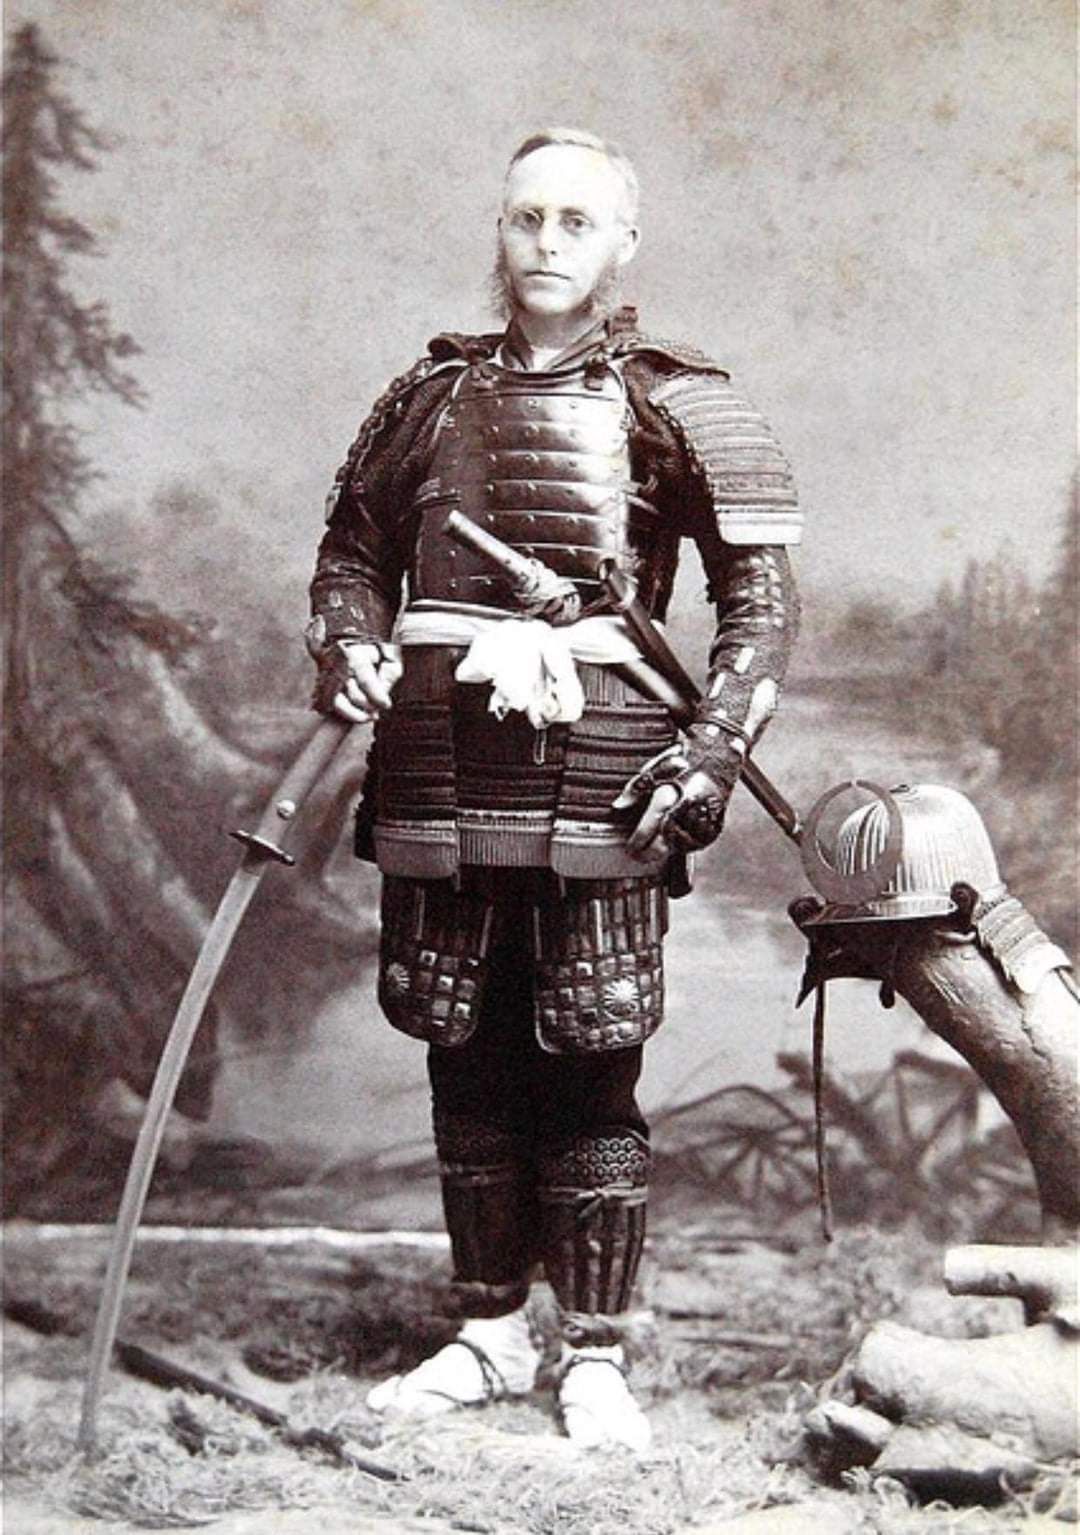 Rare photo of the first Weeb in his natural habitat, circa 1890.